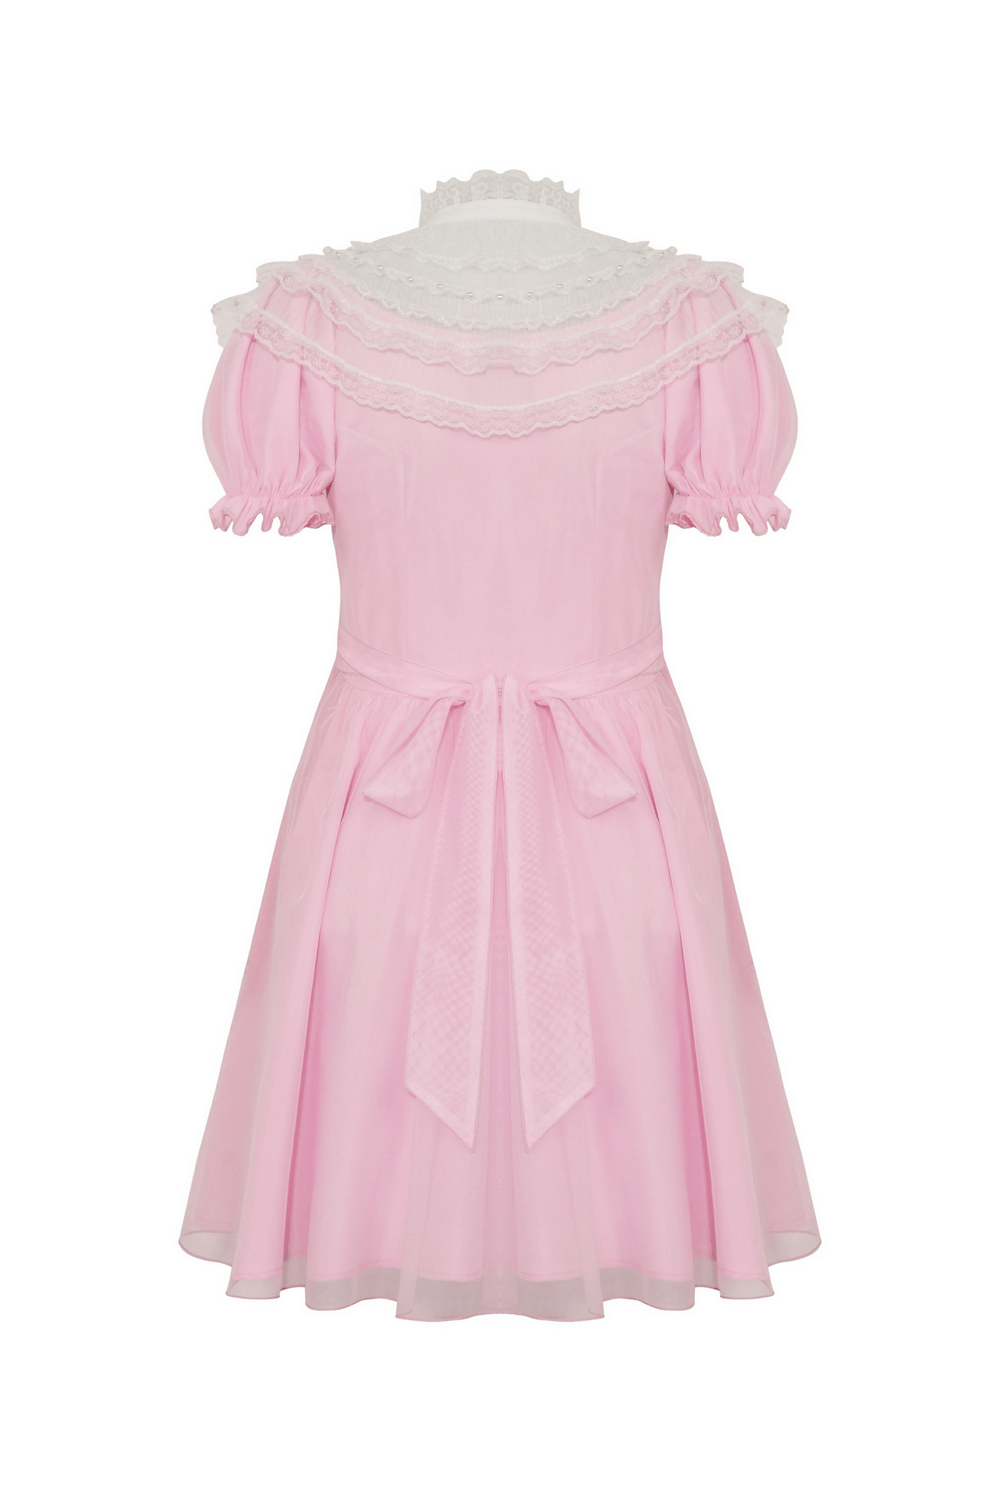 Elegant Pink Dress with Delicate Lace Detailing